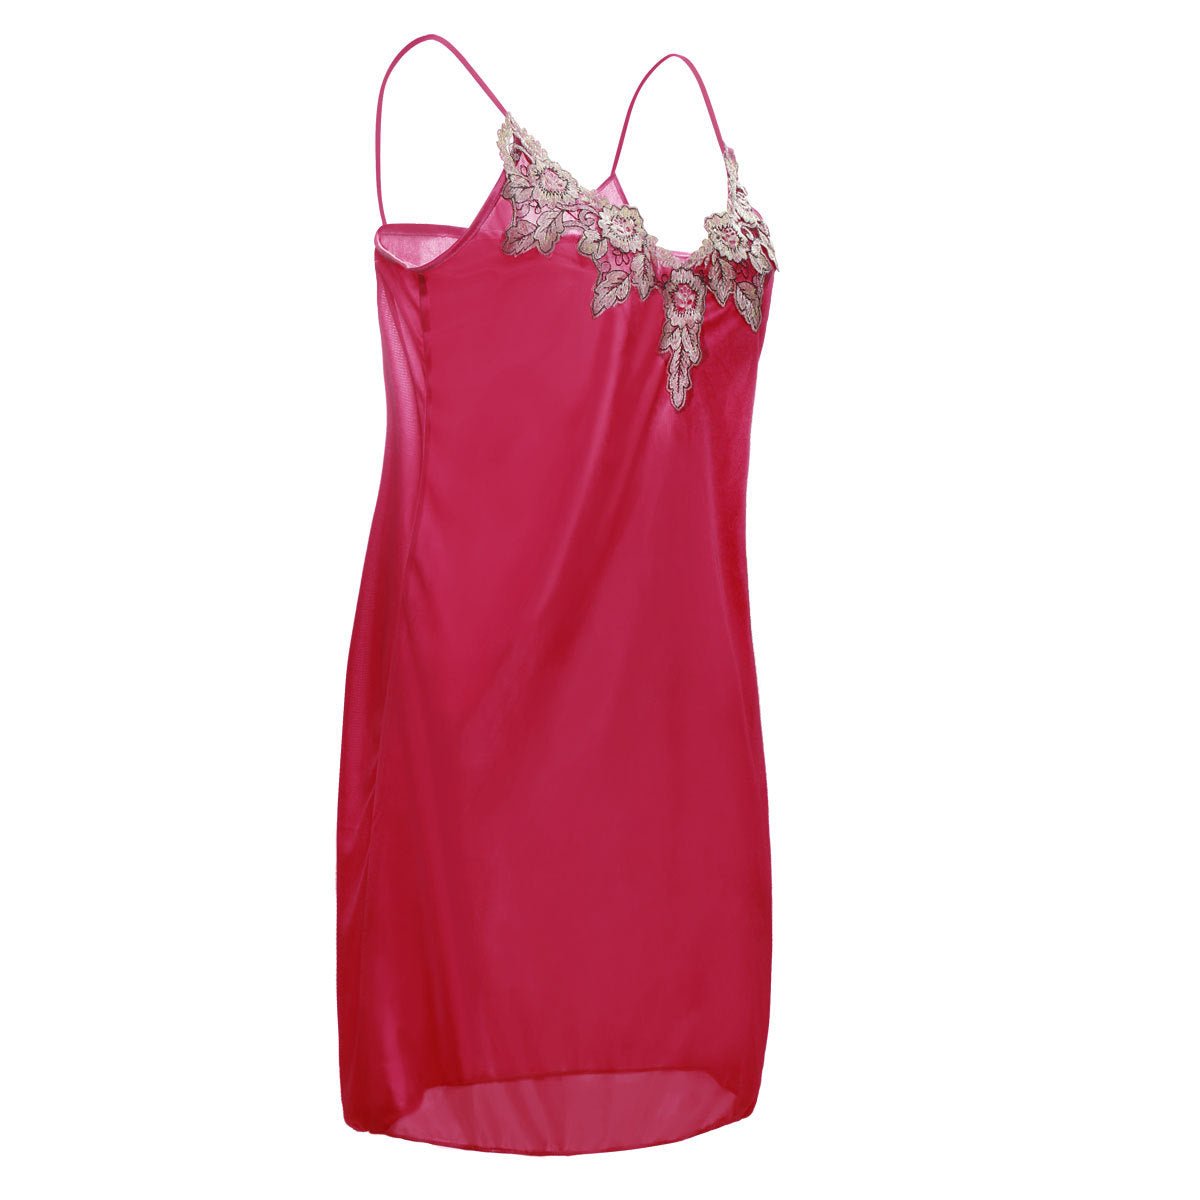 Embroidered Lace Ice Silk Camisole Nightgown 7188 - lovemesexSex Suit Pajamas